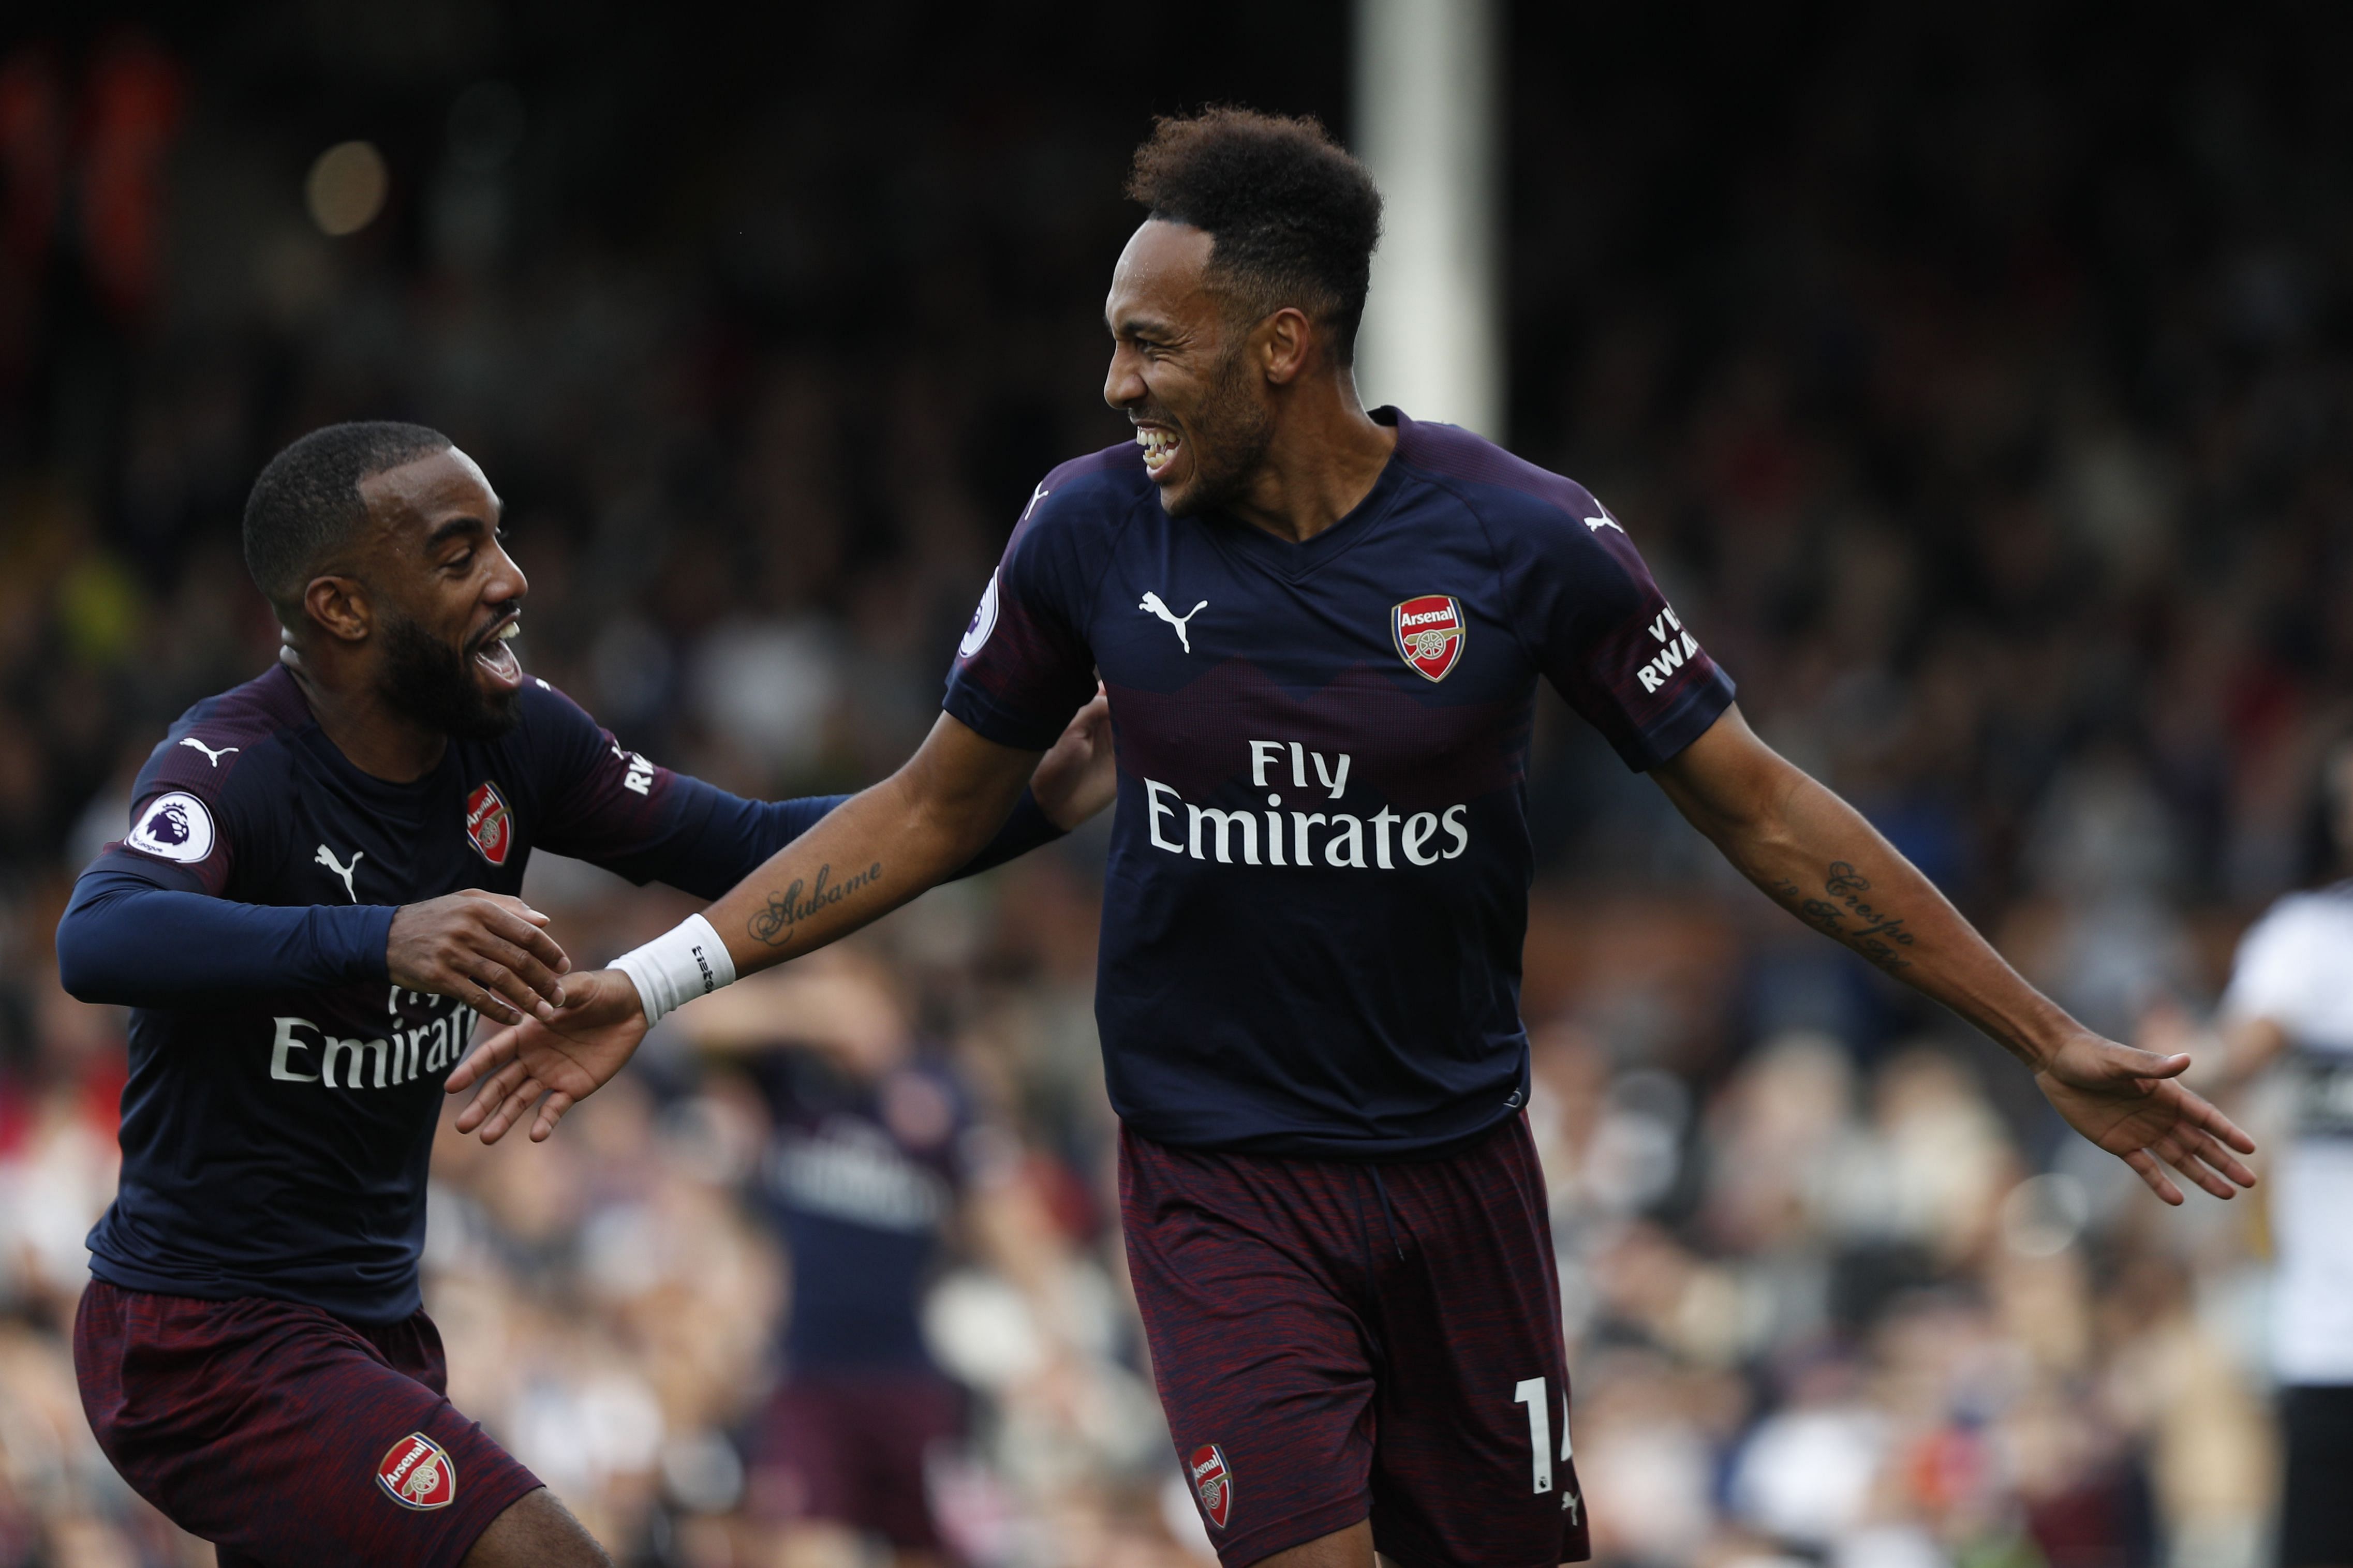 Arsenal's strike duo of Alexandre Lacazette (left) and Pierre-Emerick Aubameyang, who have combined for 14 goals this seasons, will need to be at their best against Liverpool on Saturday. AFP